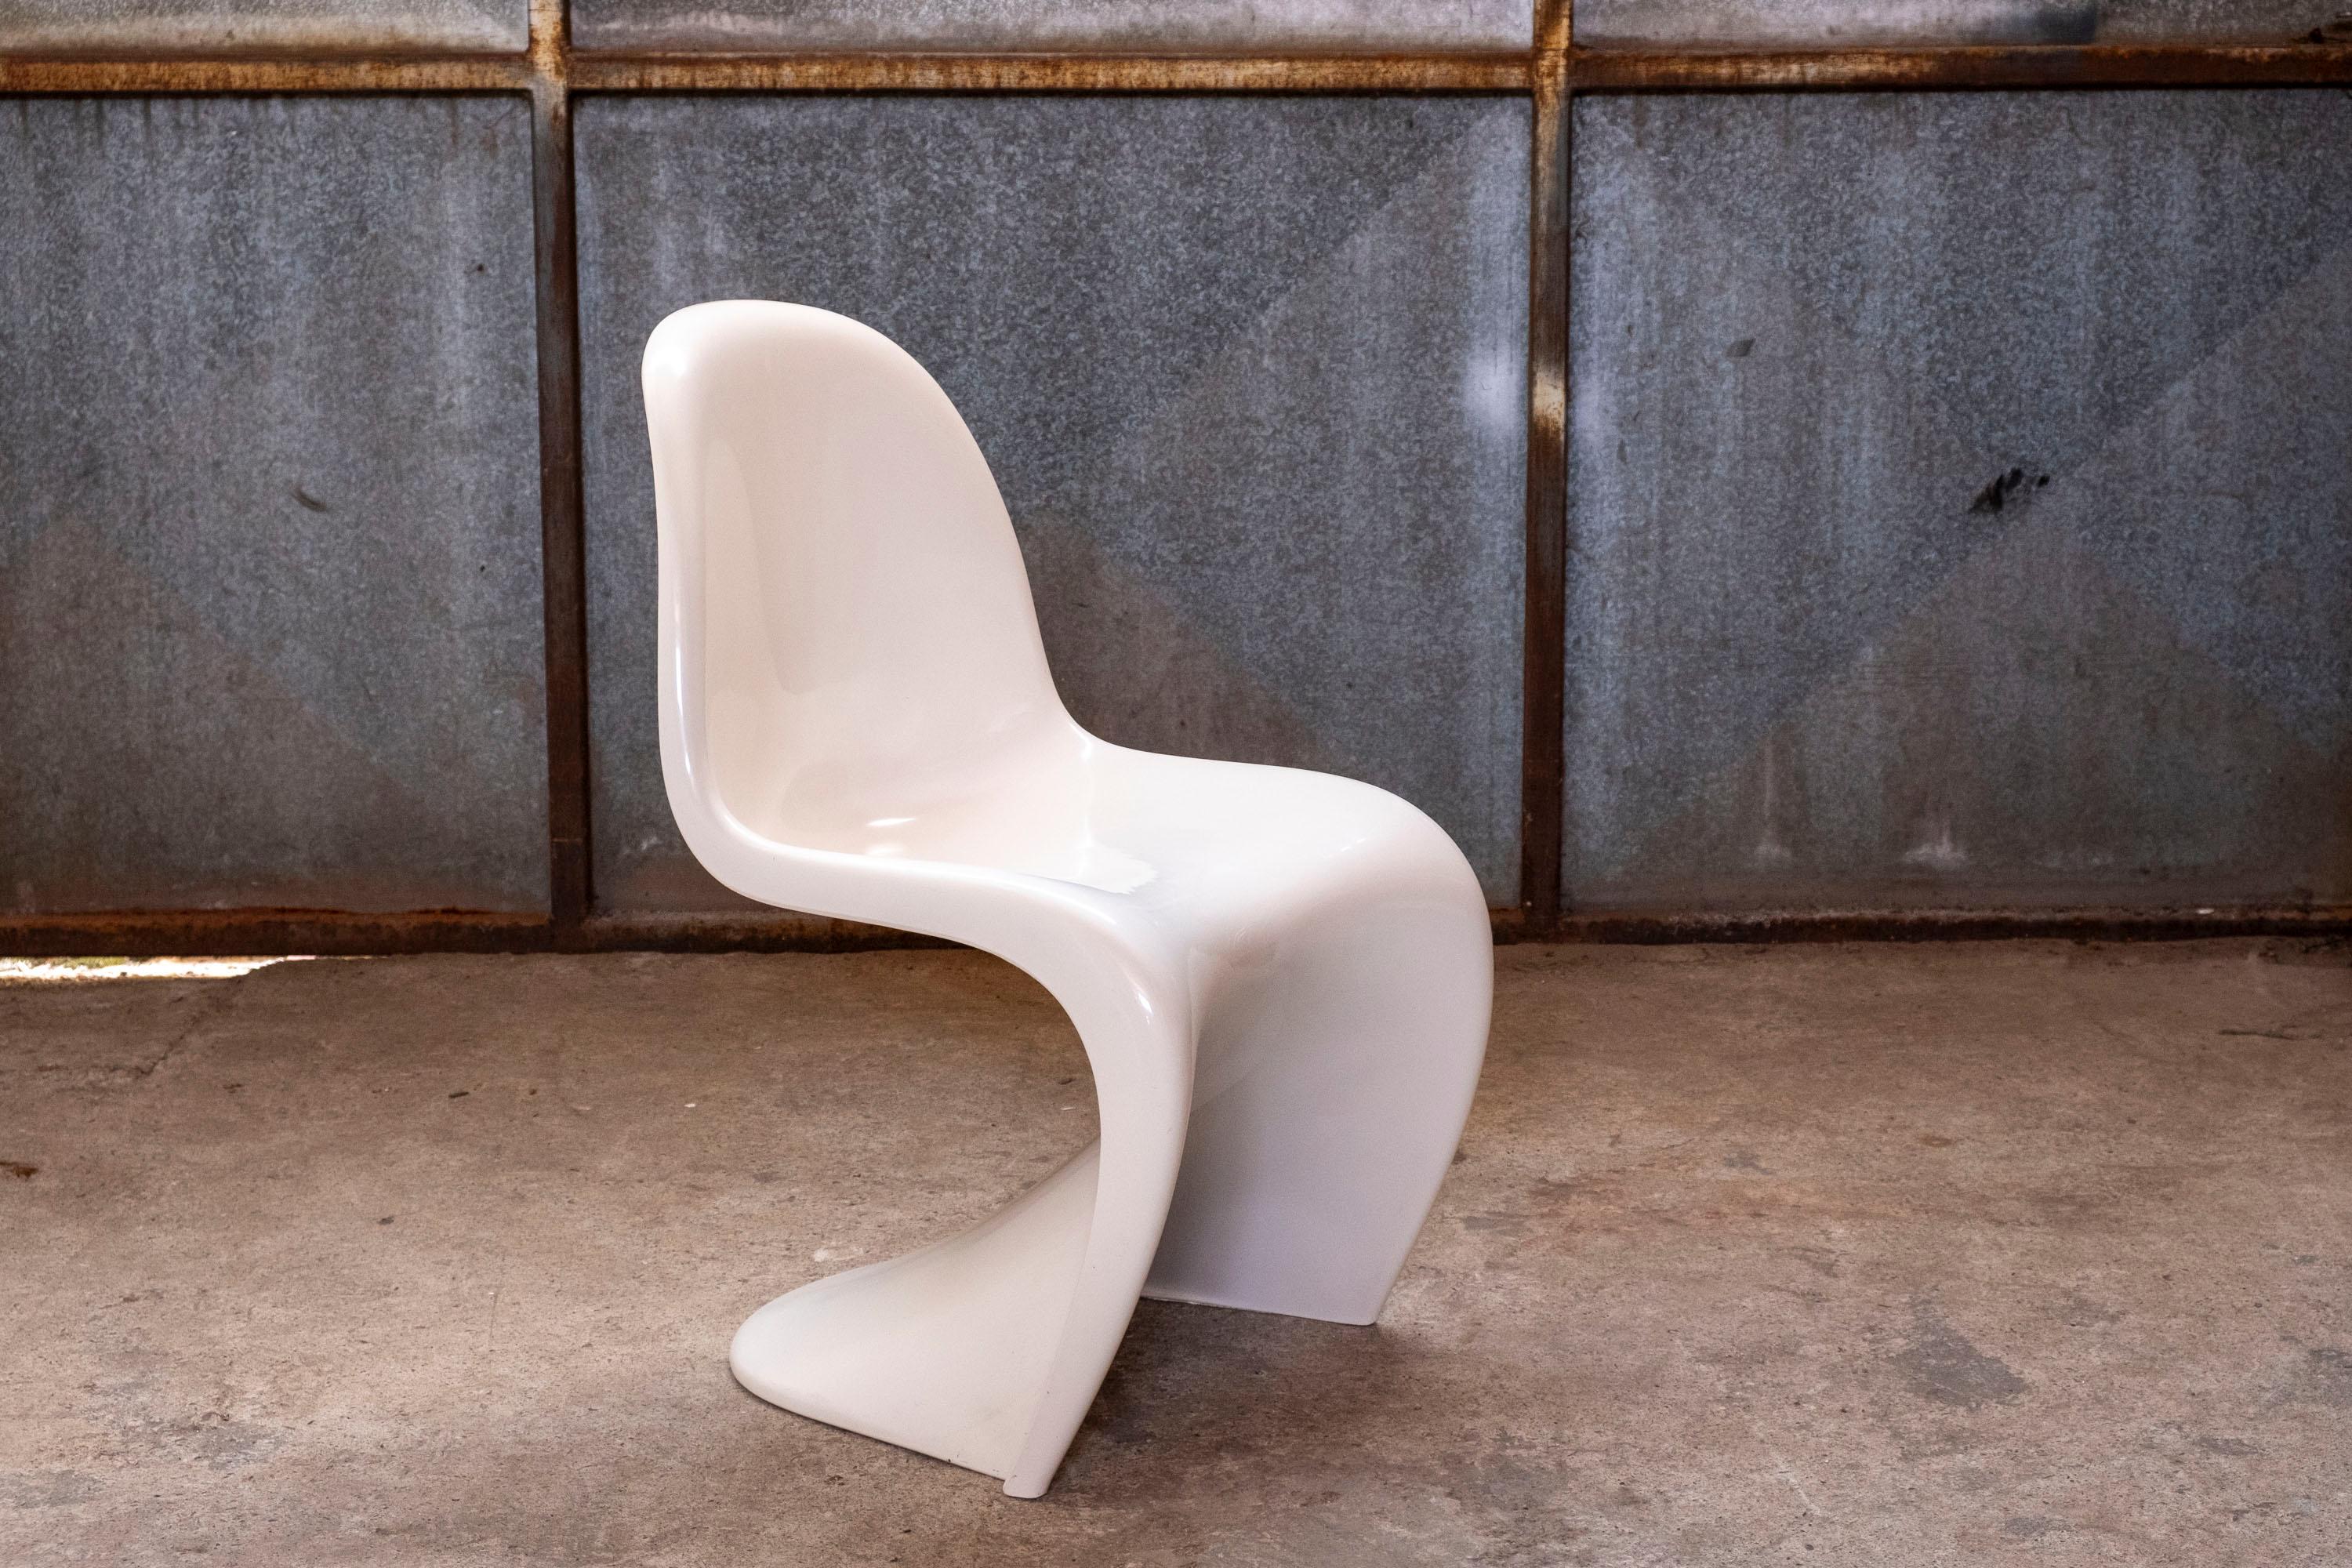 Iconic Panton Chair, designed by Verner Panton for Hermann Miller / Fehlbaum Production. Designed in 1960, this chair is from the 3rd production run (from 1971 until 1979) in thermoplastic  with reinforcement ribs underneath. The chair is marked